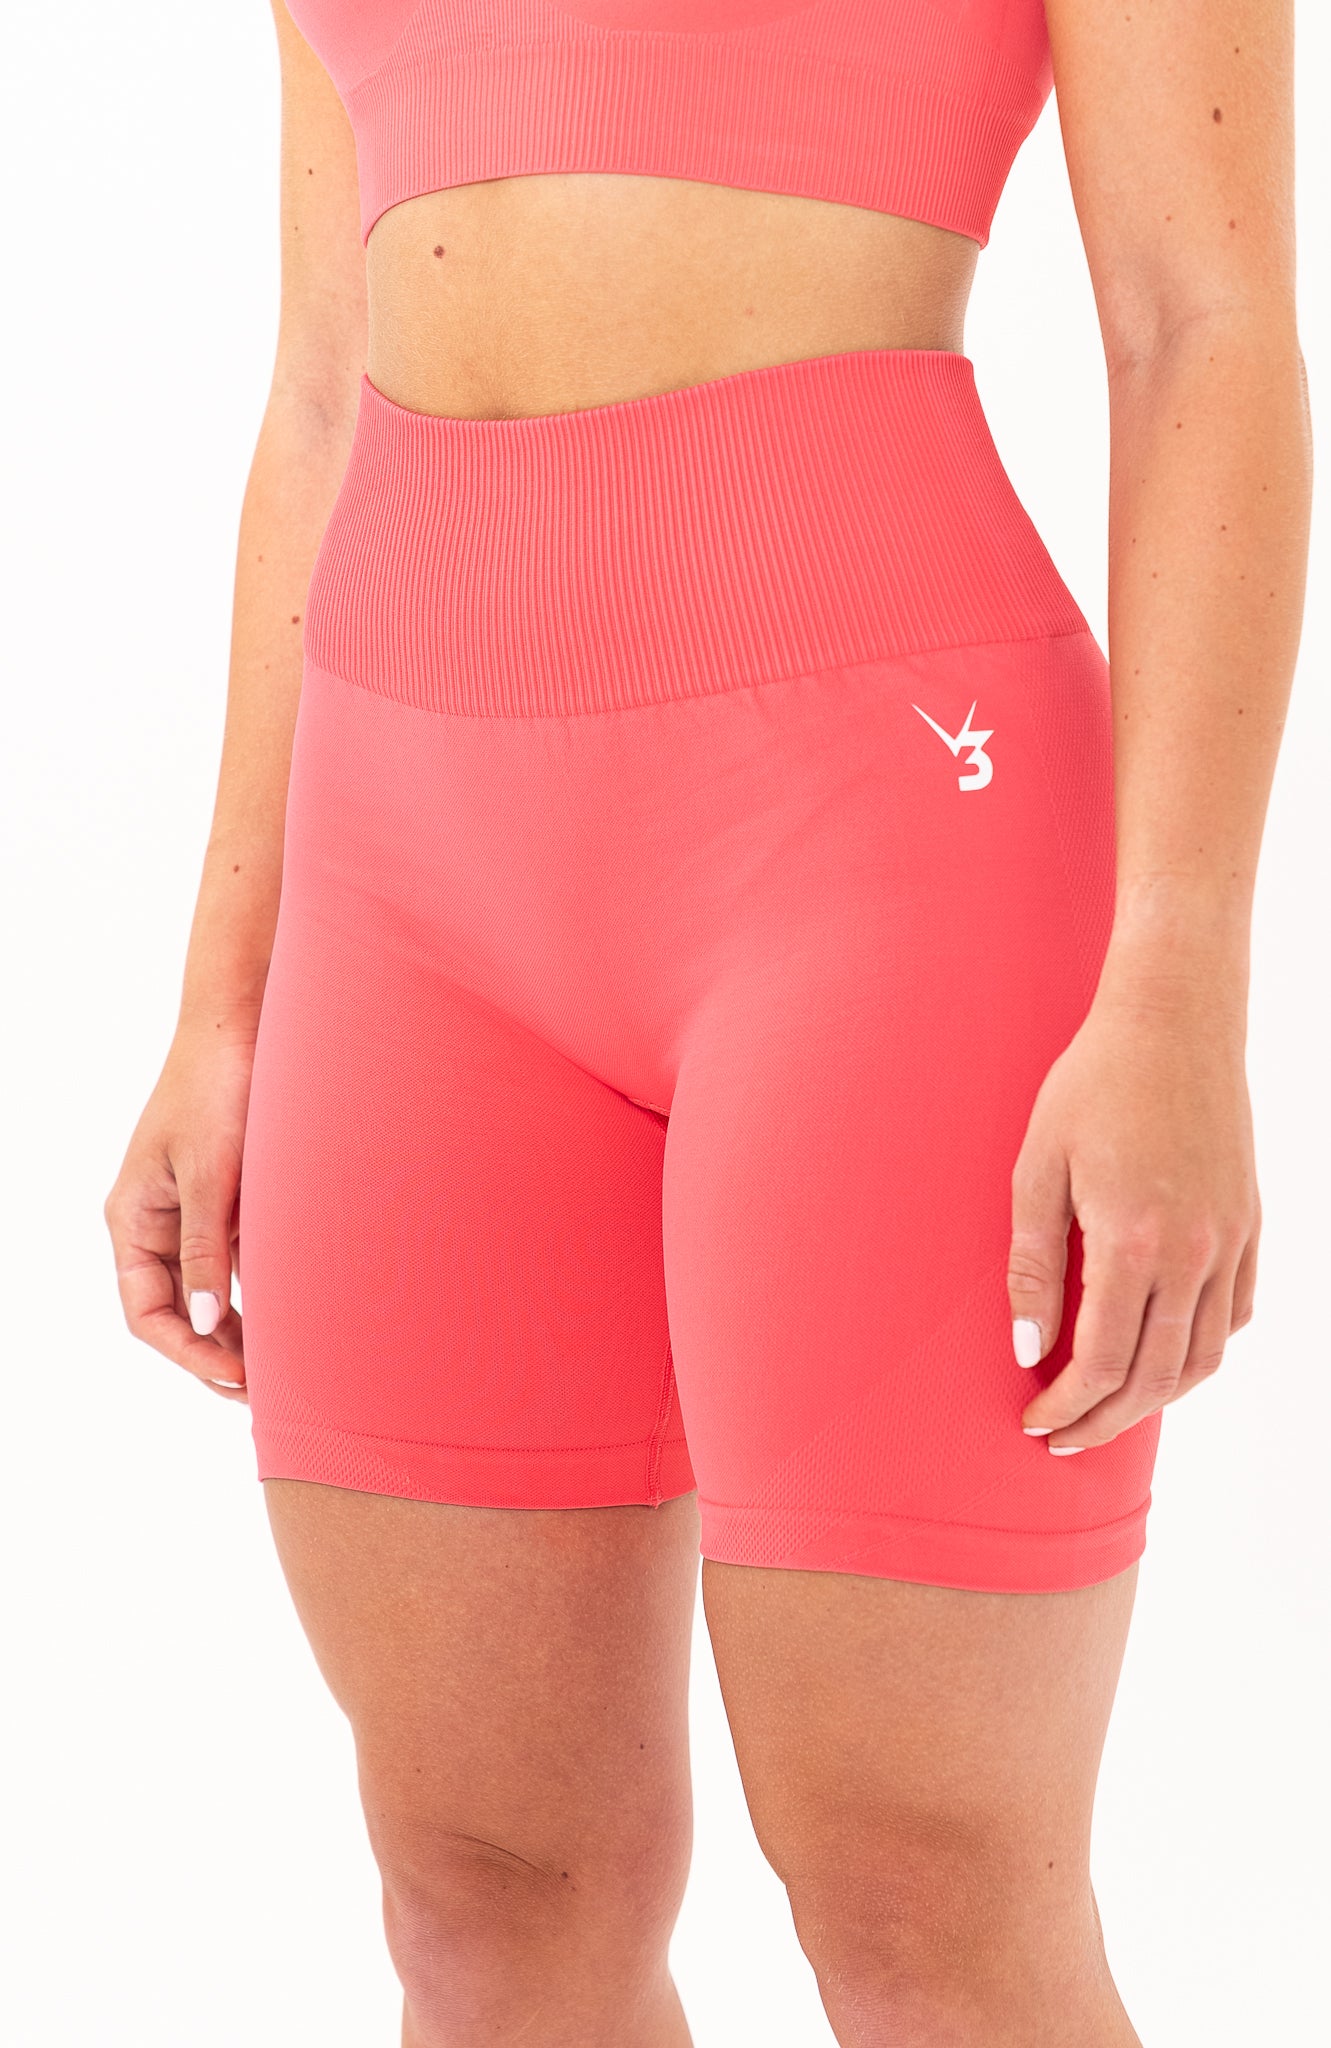 redbaysand Women's seamless Limitless high waisted cycle shorts in coral pink – Squat proof 5 inch inseam leg bum enhancing shorts for Gym workouts training, Running, yoga, bodybuilding and bikini fitness.